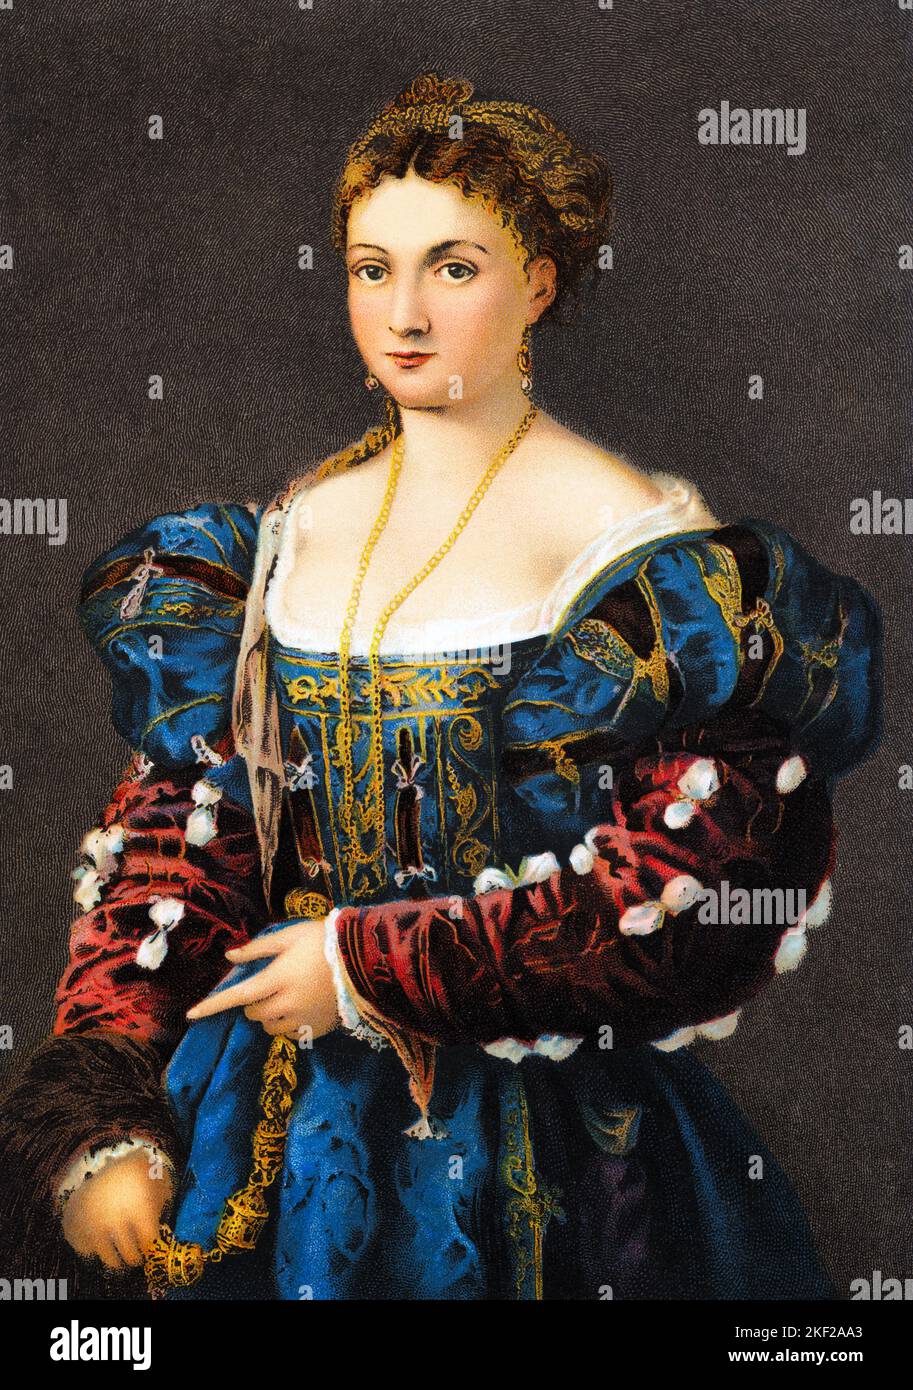 1530s LA BELLA BY TITIAN A BEAUTIFUL RENAISSANCE WOMAN WEARING FASHION OF THE TIME IN THE PITTI PALACE FLORENCE ITALY - ka9490 HAR001 HARS OLD FASHIONED Stock Photo